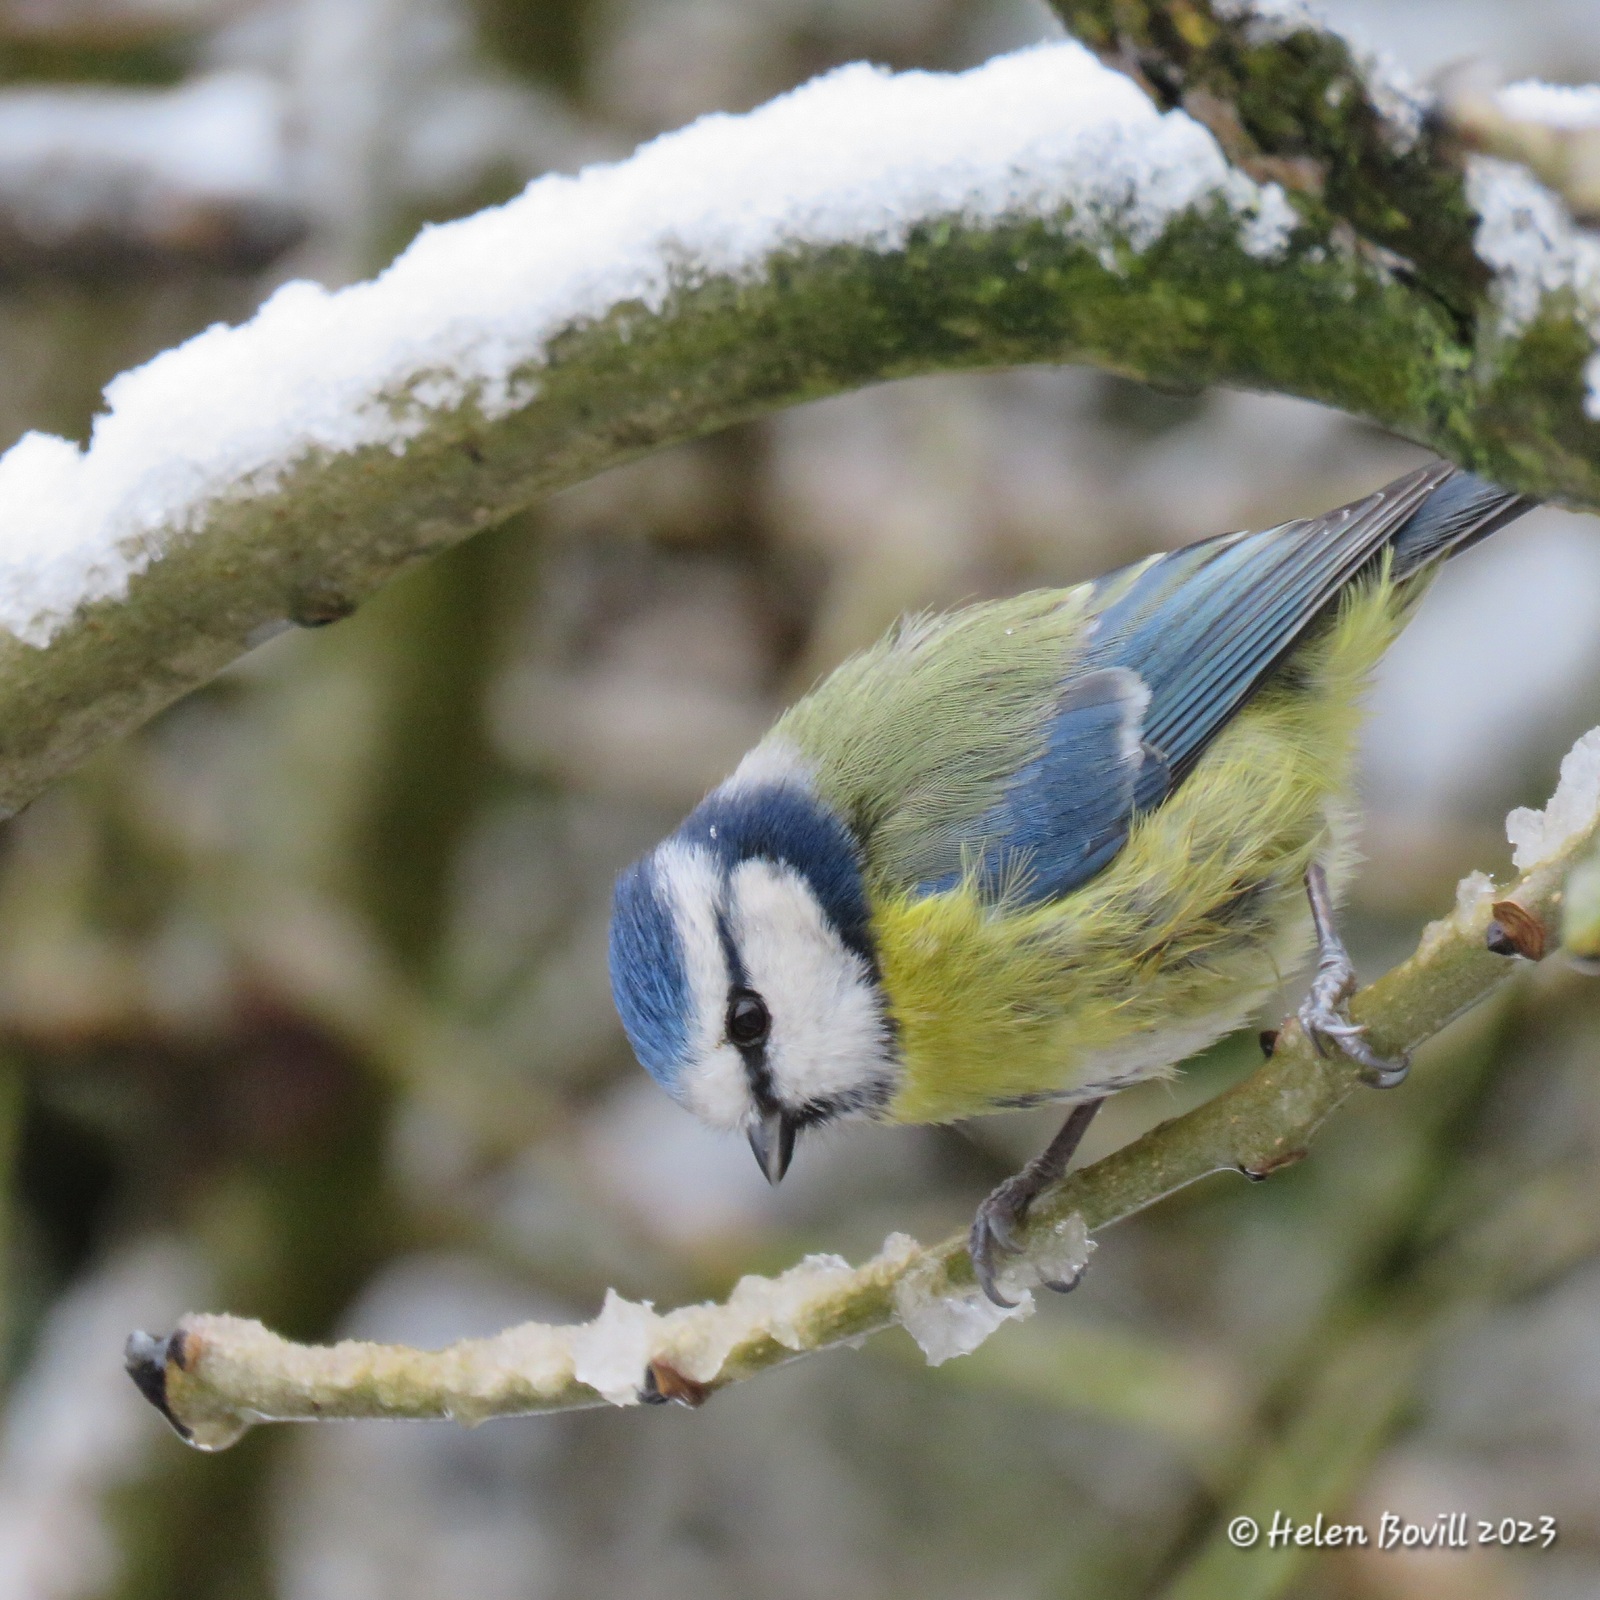 A Blue Tit on a snowy branch in the cemetery